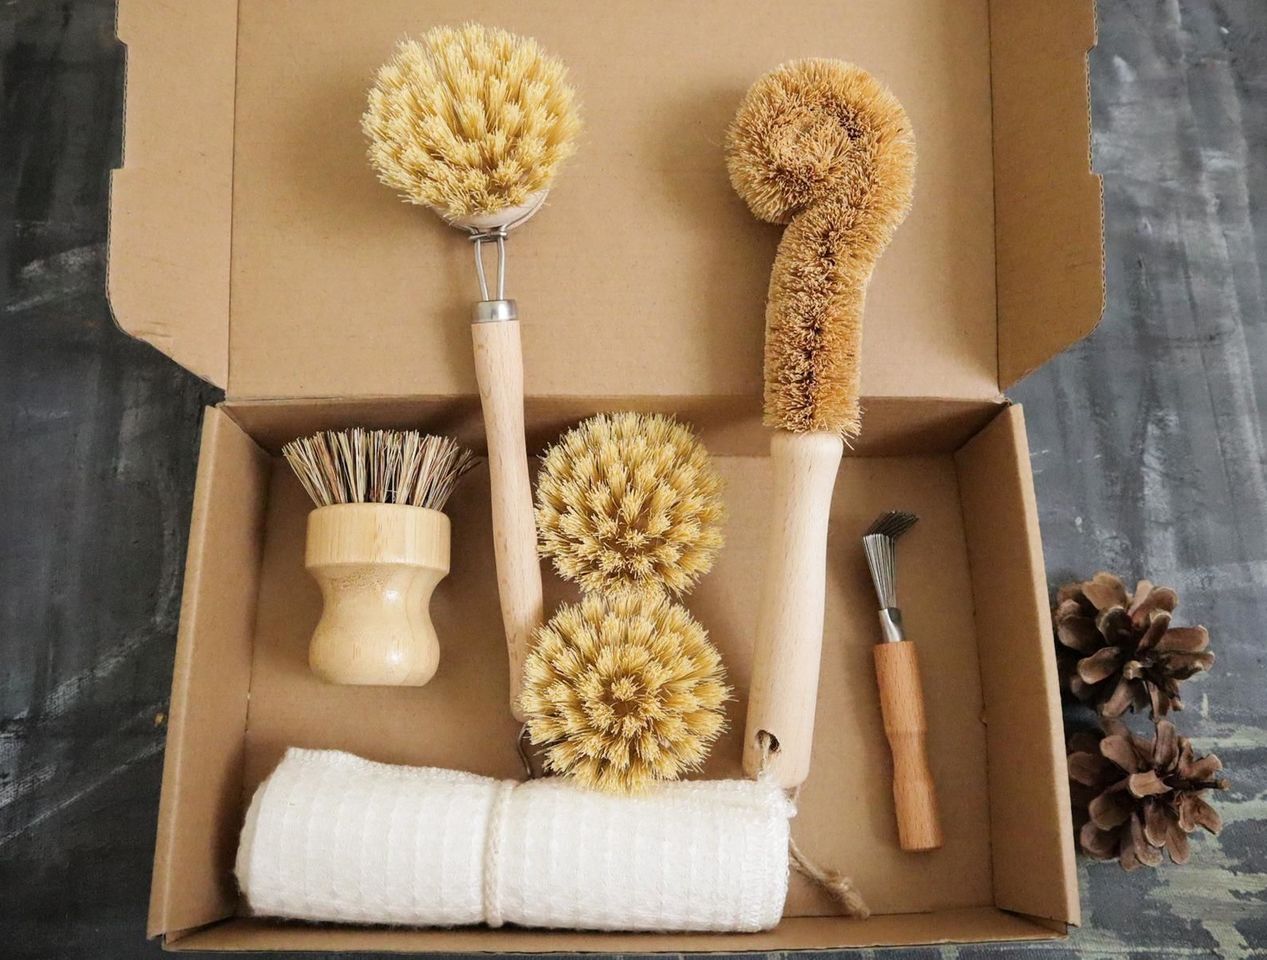 These Zero-Waste Cleaning Kits Have Everything You Need for a Sparkling Home